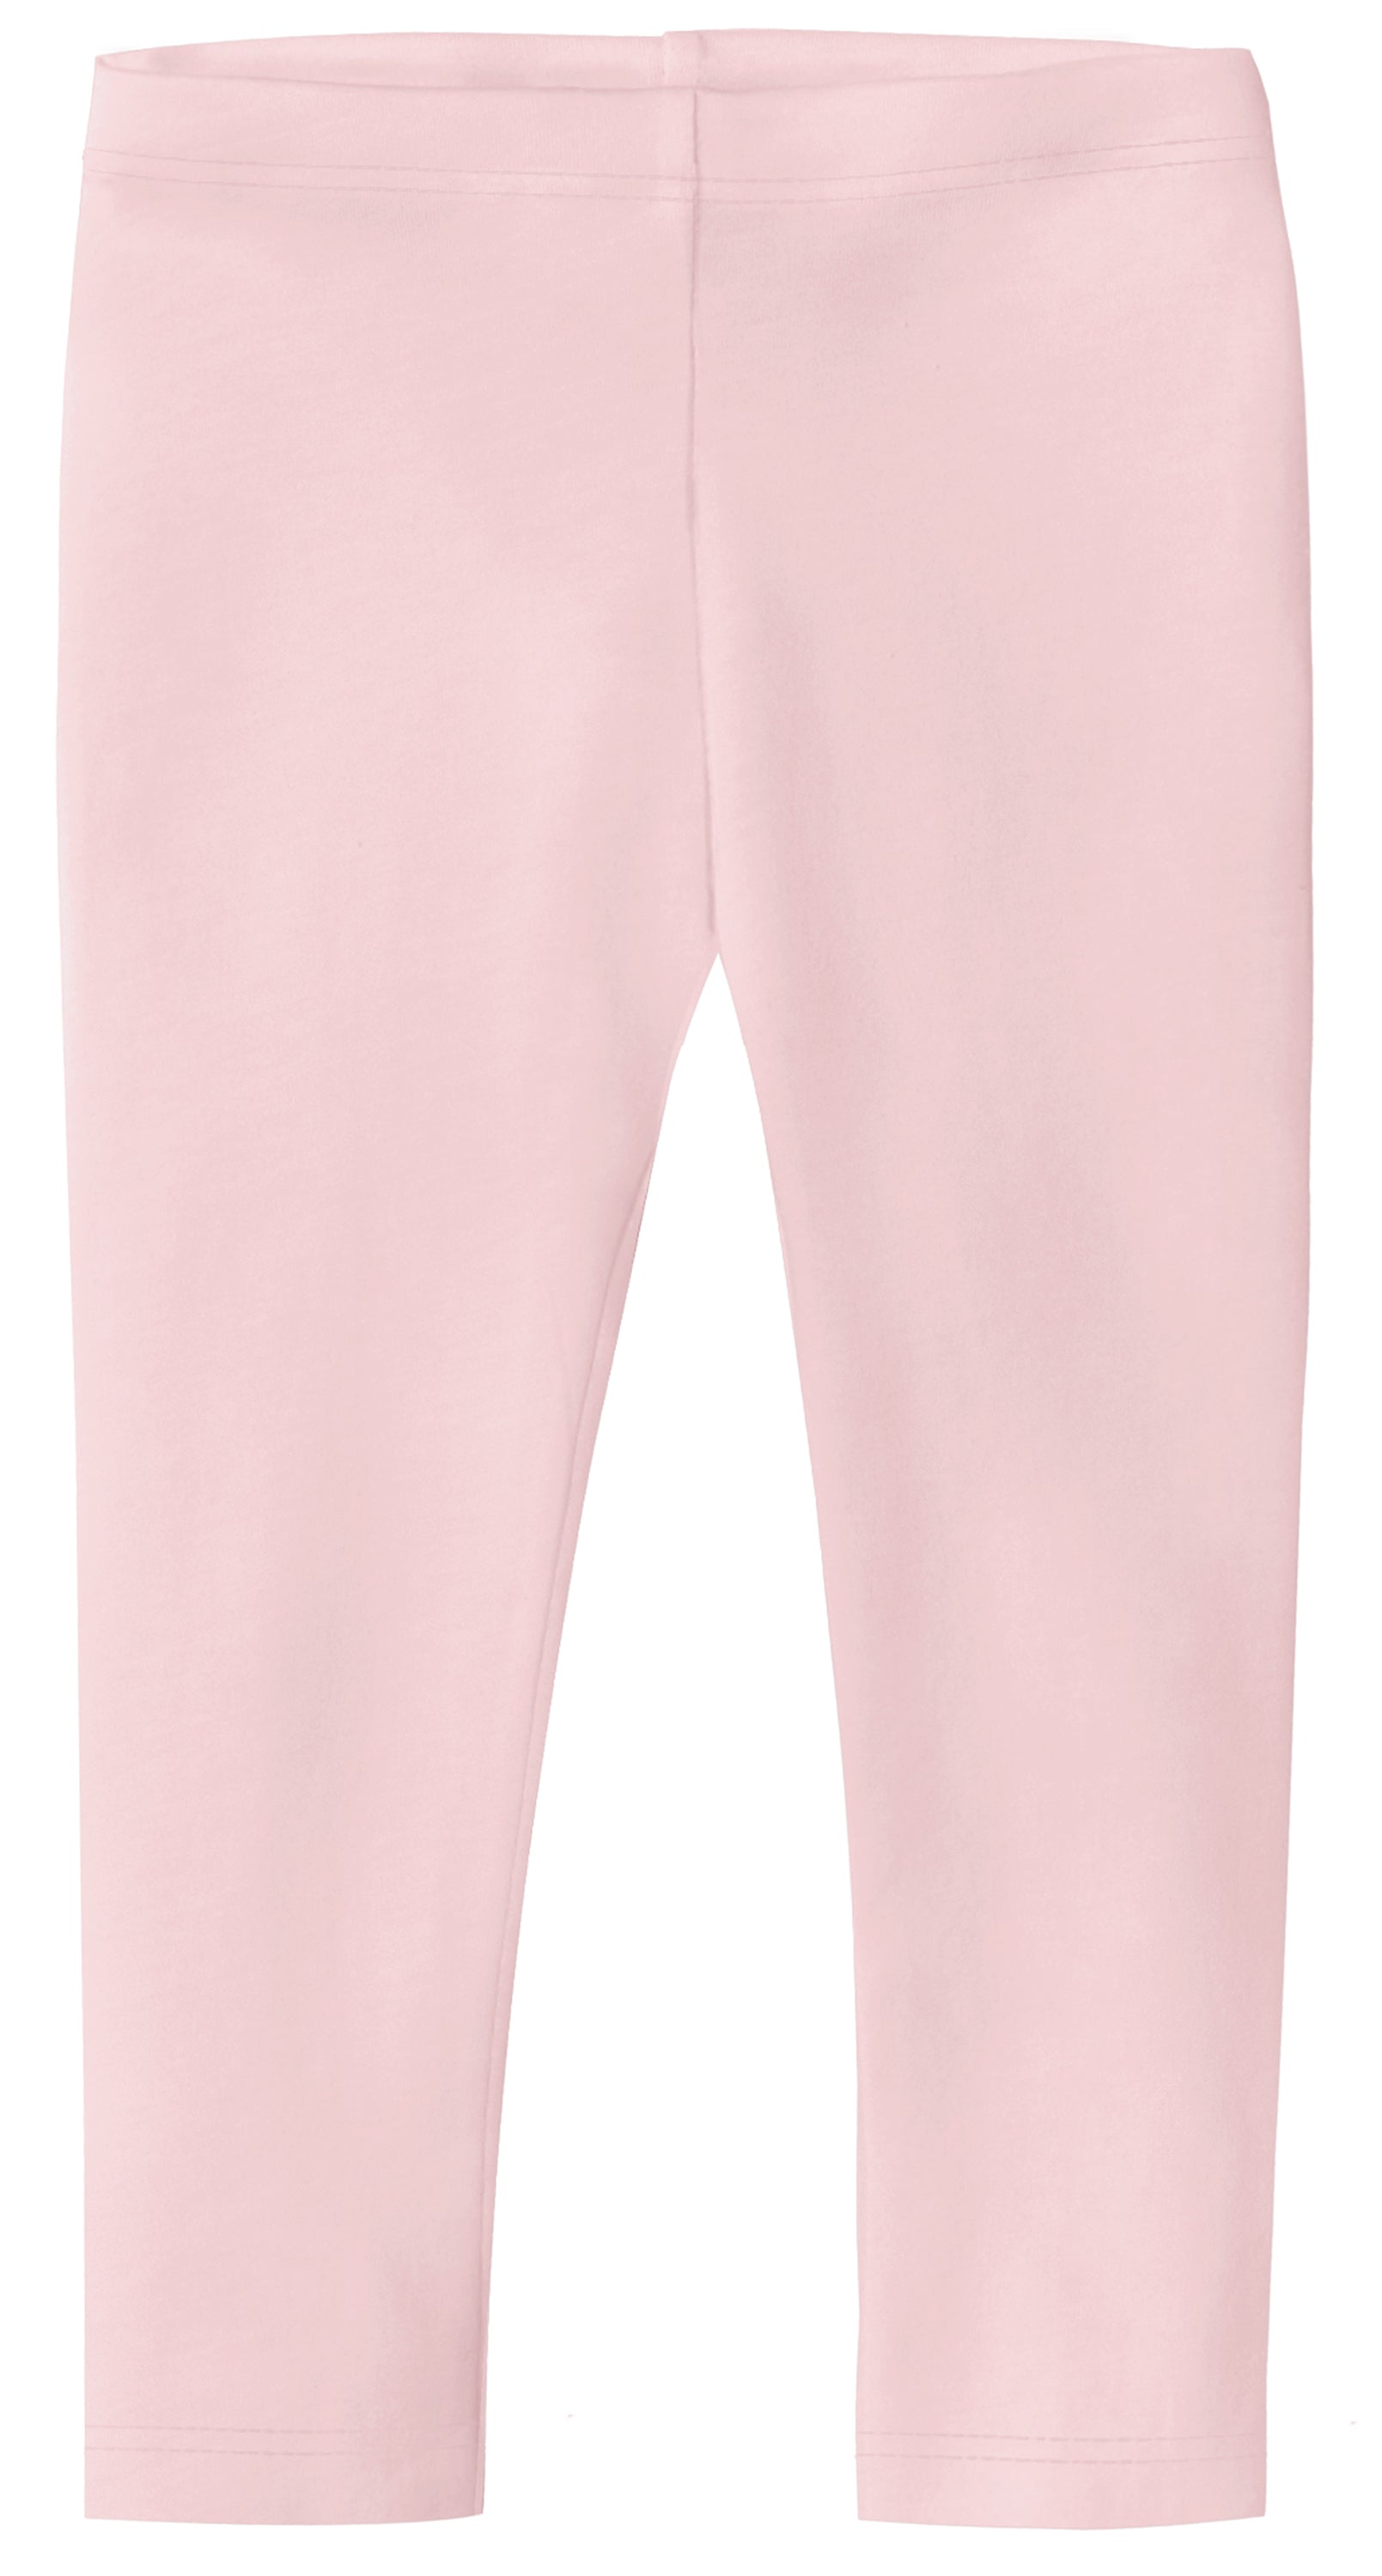 Plain Pink Cotton Legging, Size: Small, Medium and Large at Rs 135